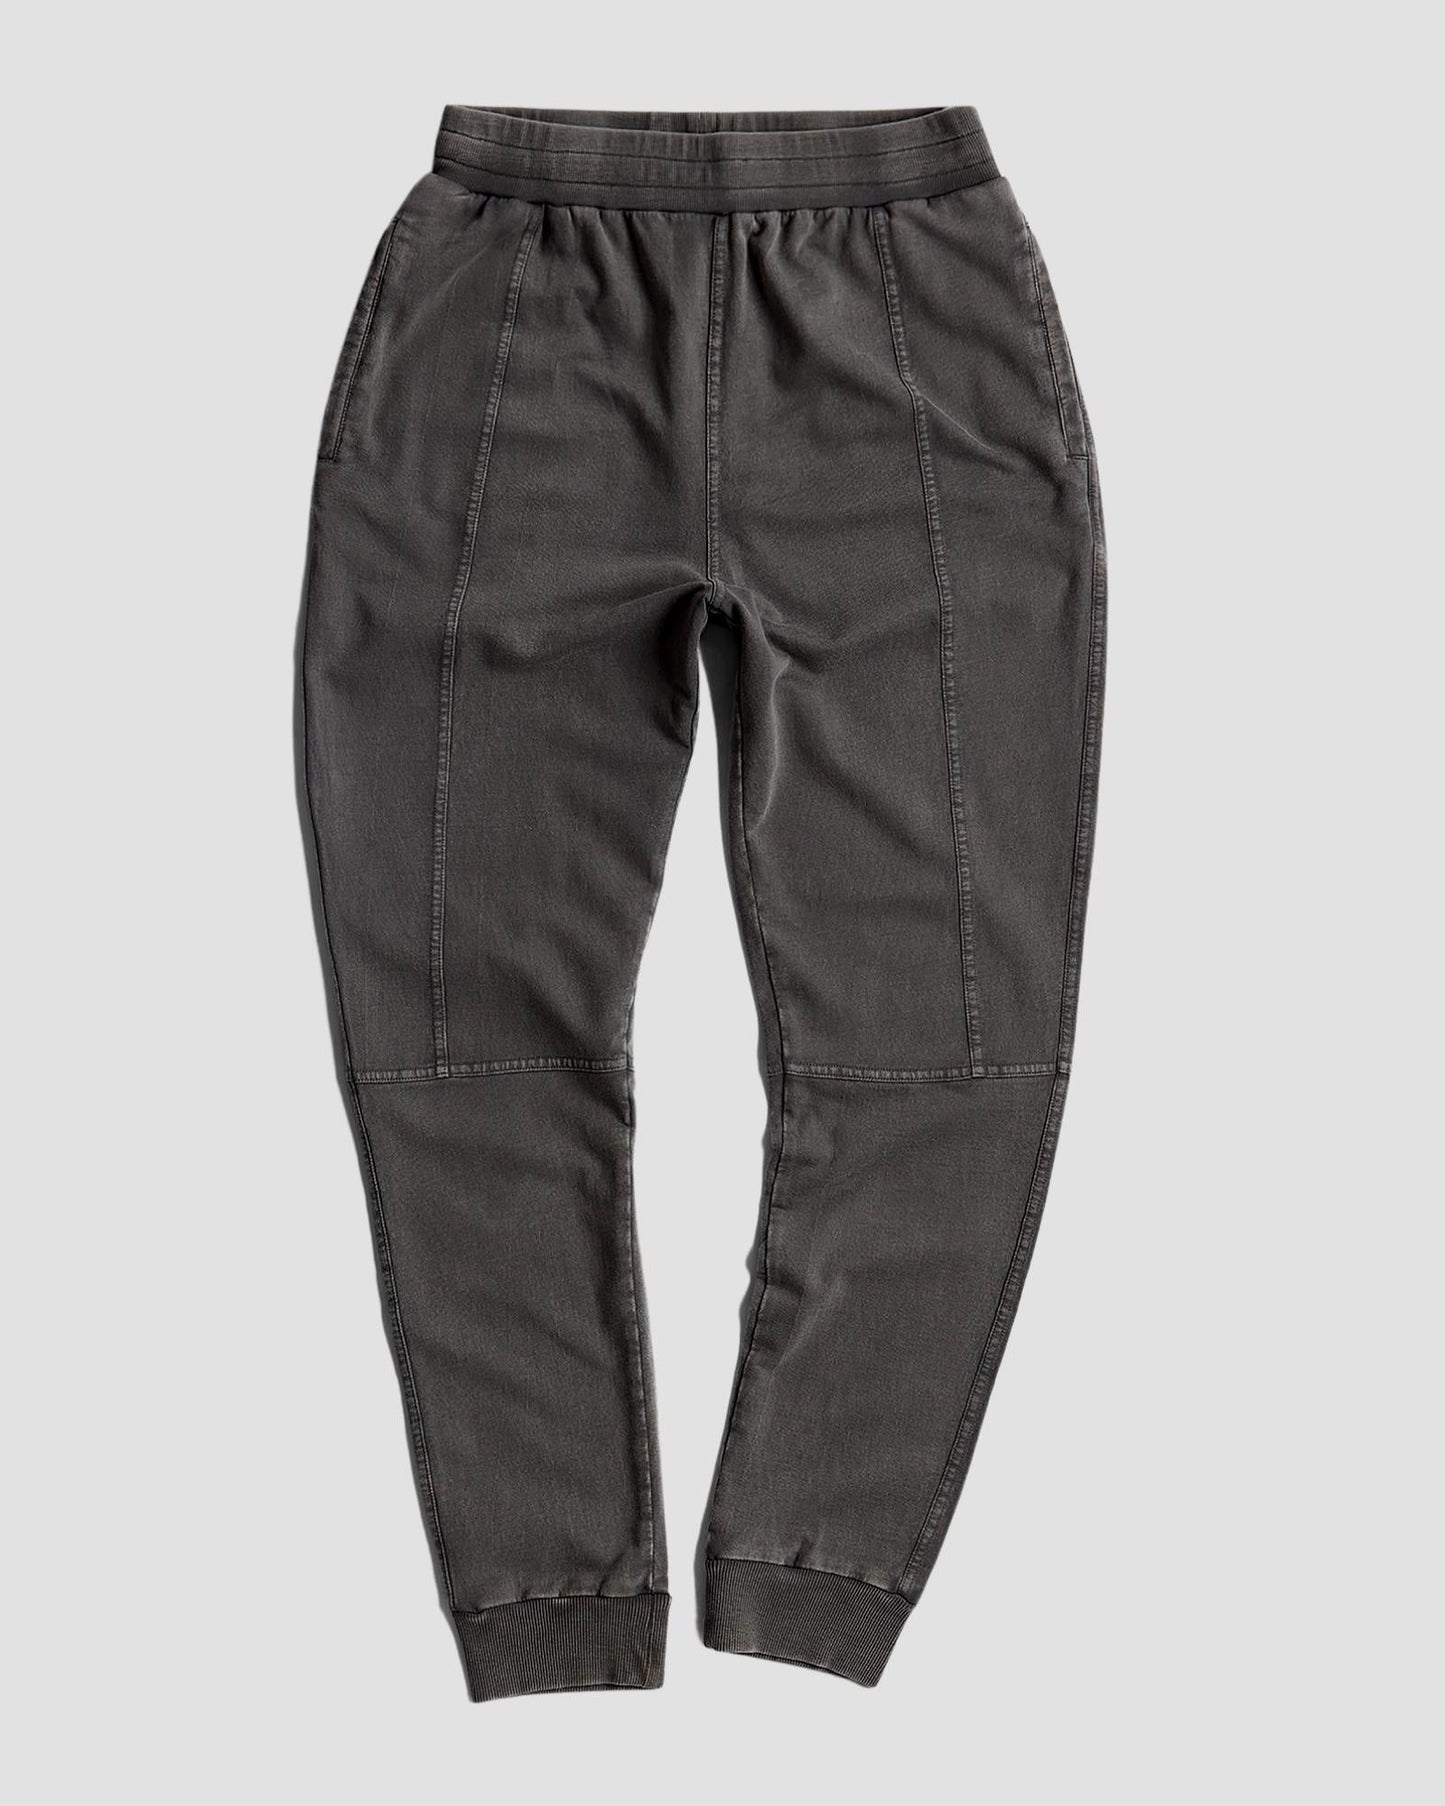 cityof_ - Distressed Panelled Joggers